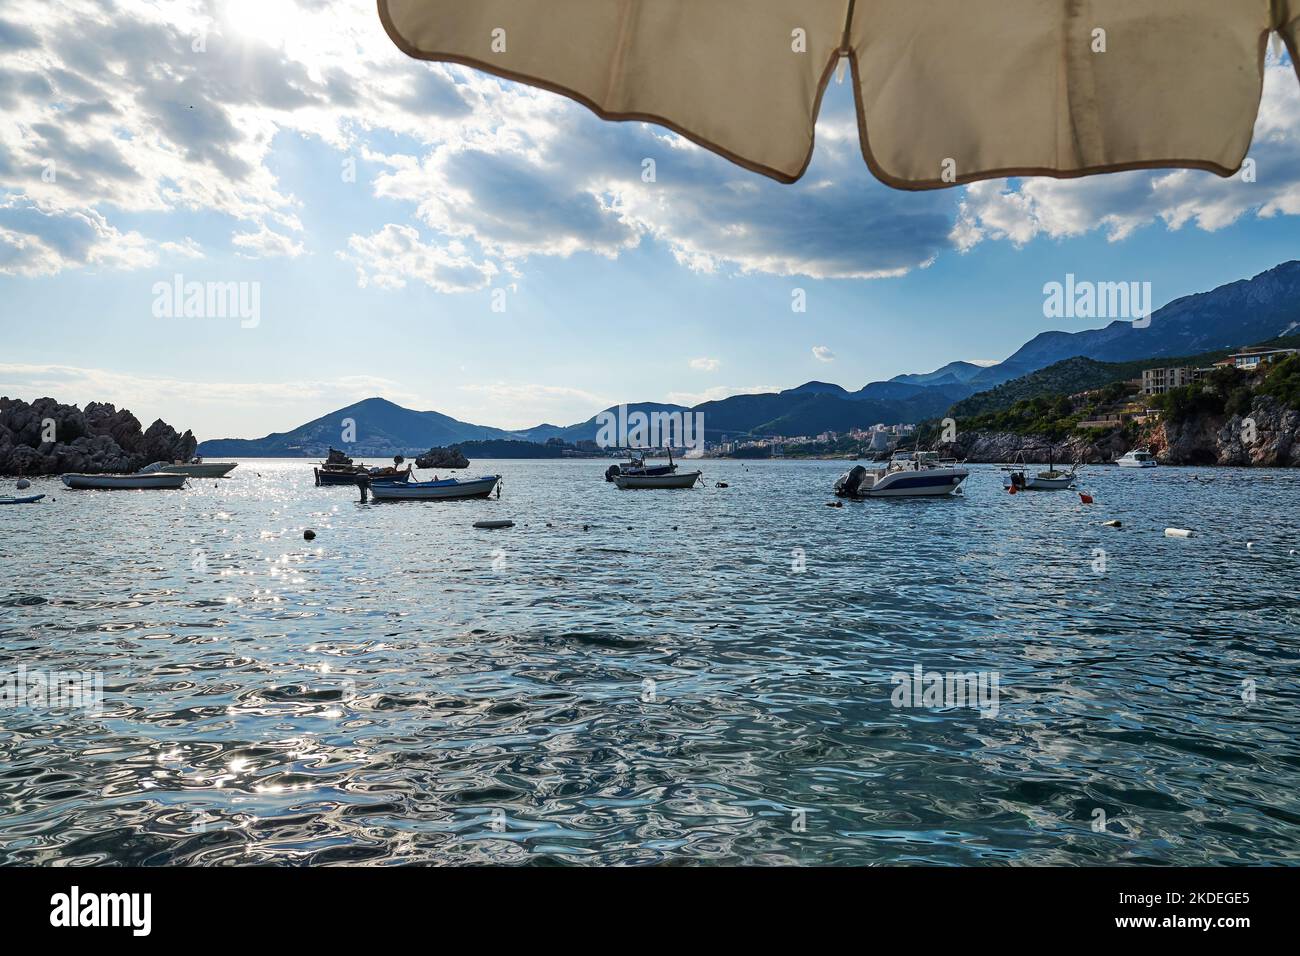 Sea bay with mountains and many fishing boats. Travel destinations Stock Photo